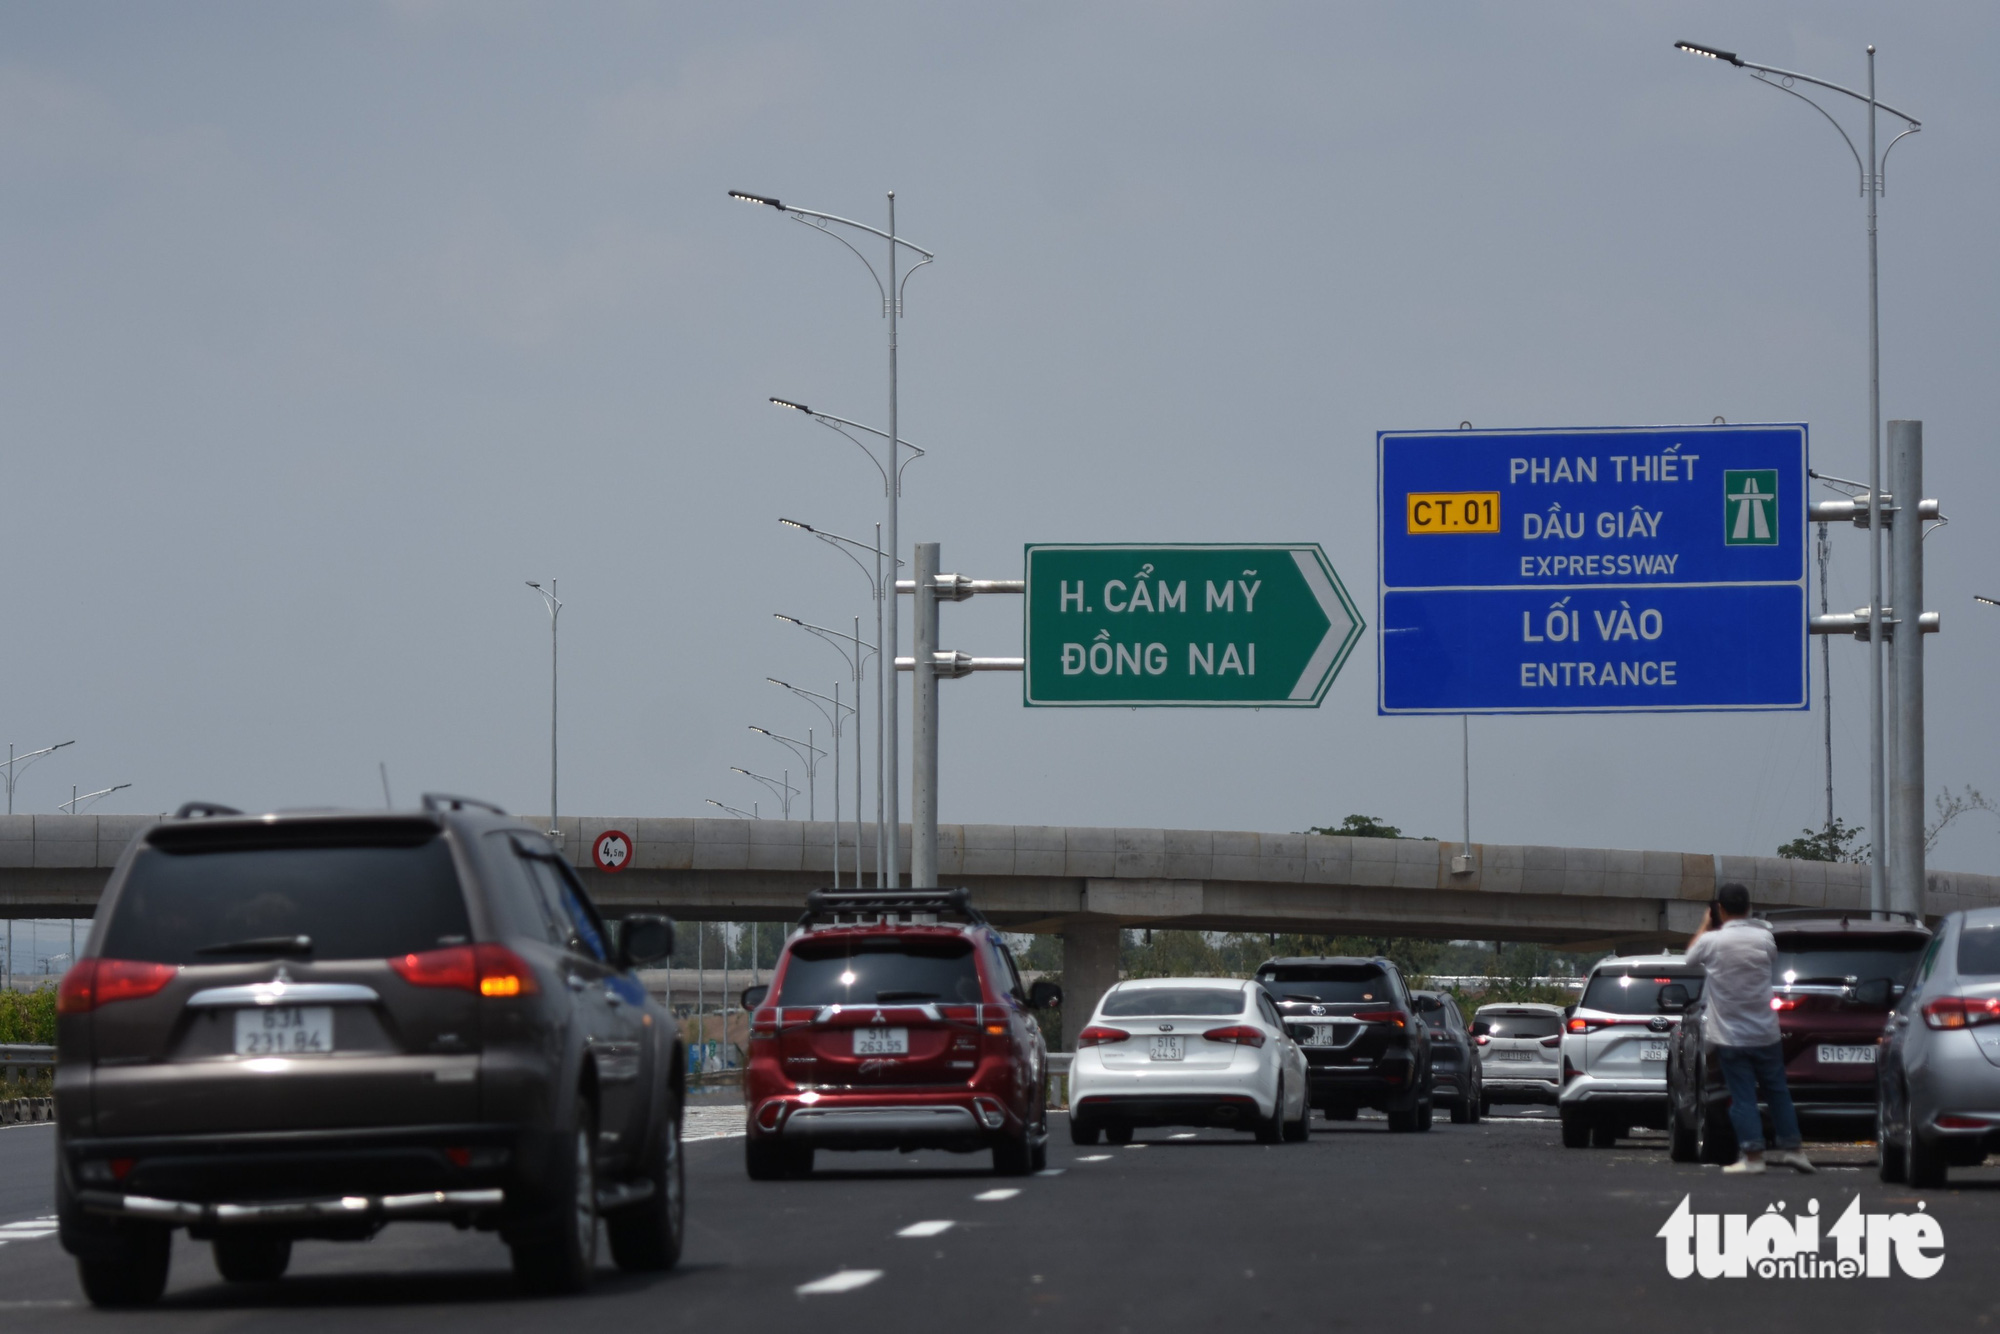 Most of the vehicles are from the Ho Chi Minh City – Long Thanh – Dau Giay Expressway.